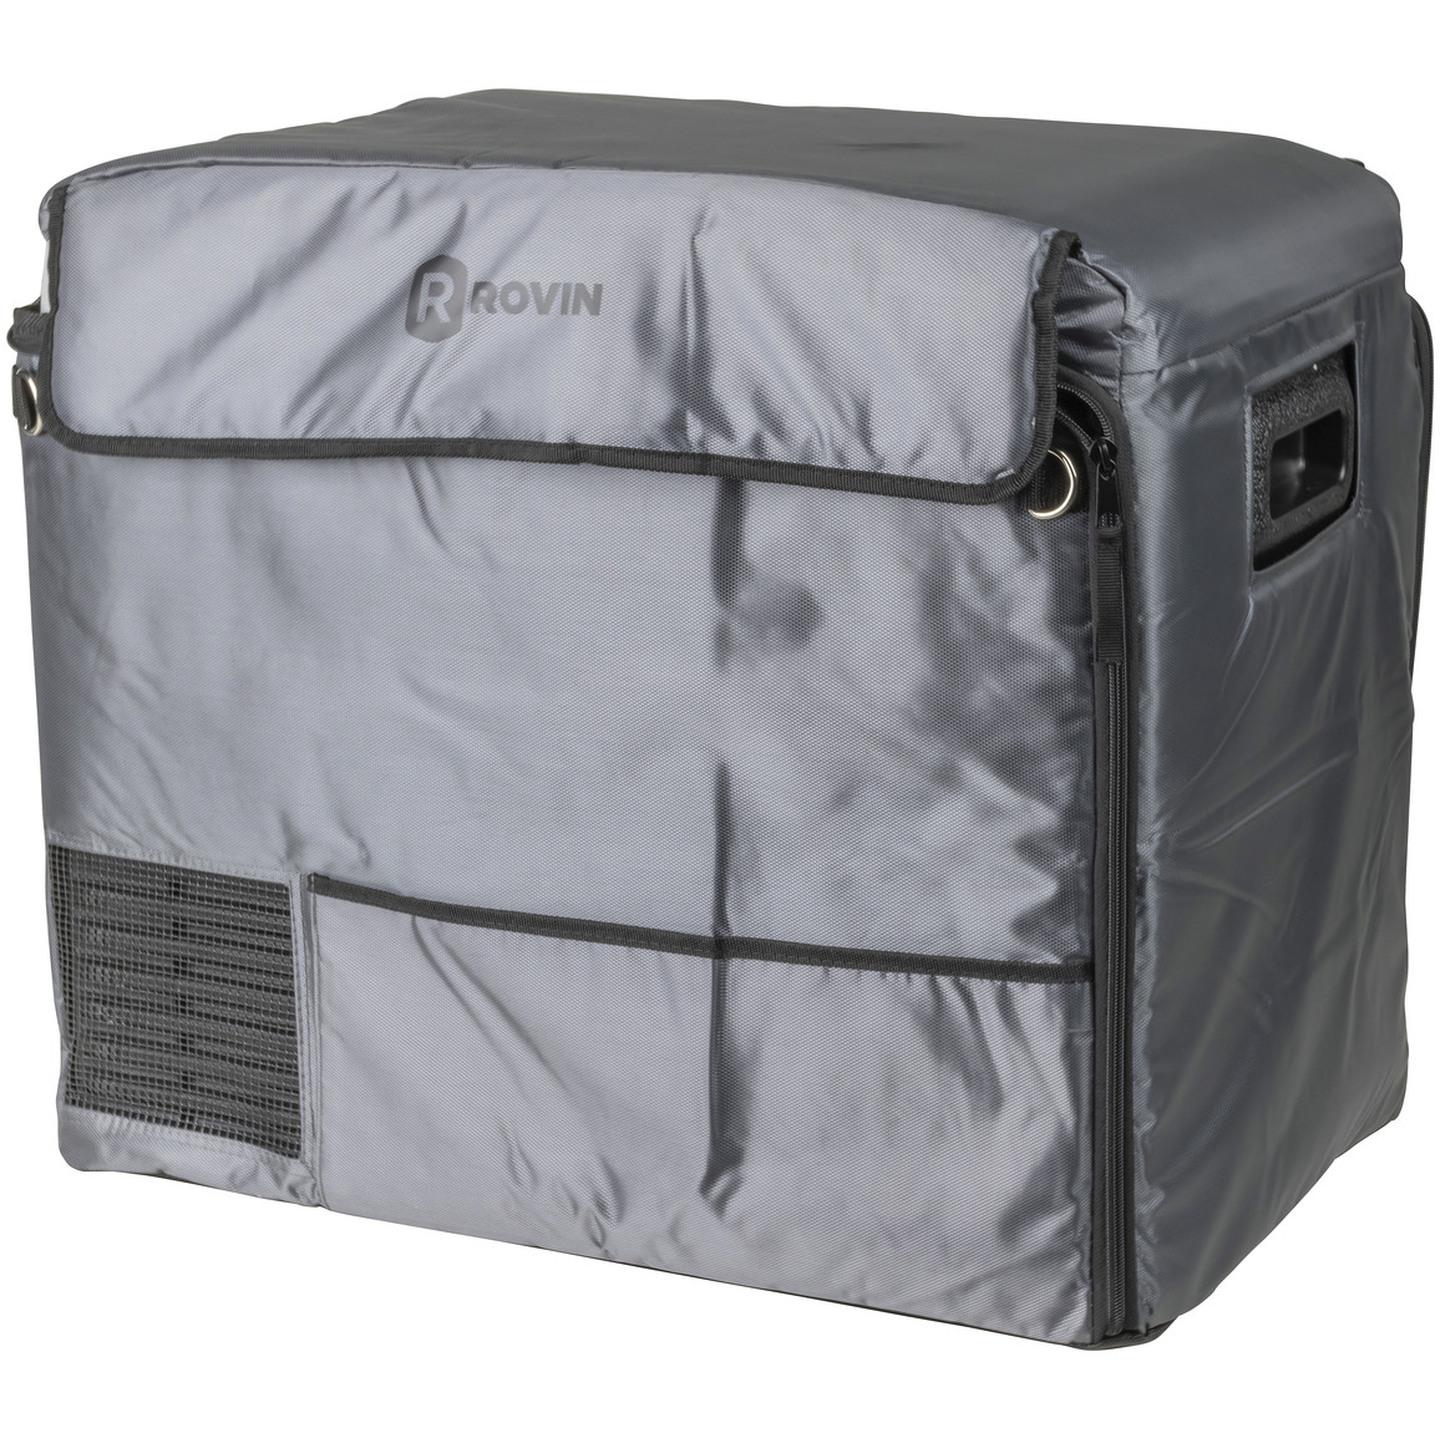 Grey Insulated Cover for 50L Rovin Portable Fridge Freezer